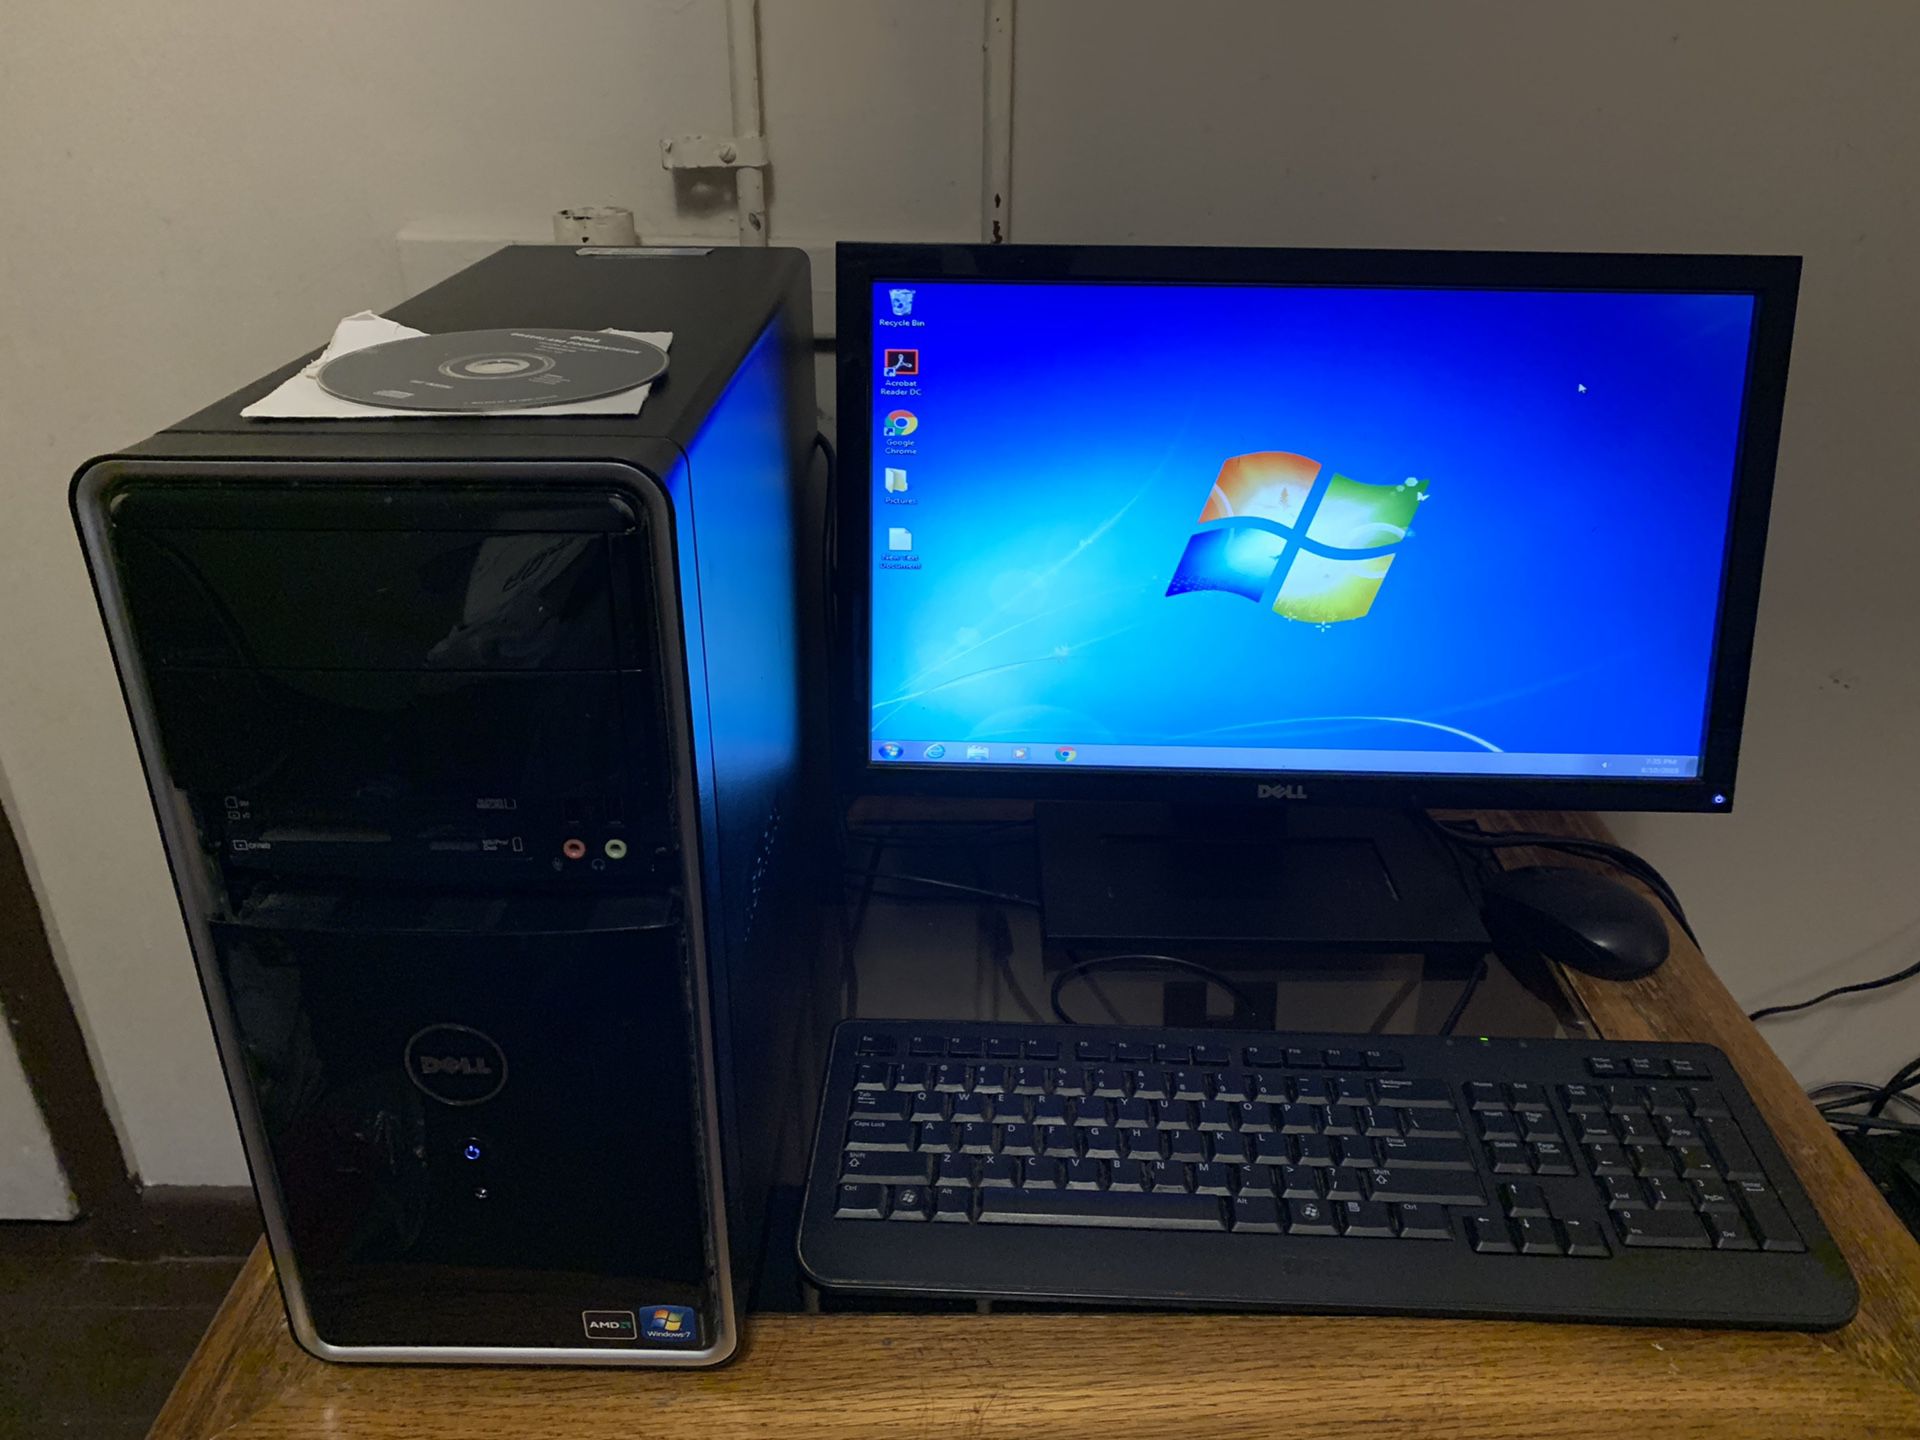 Dell Inspiron 570 personal computer system